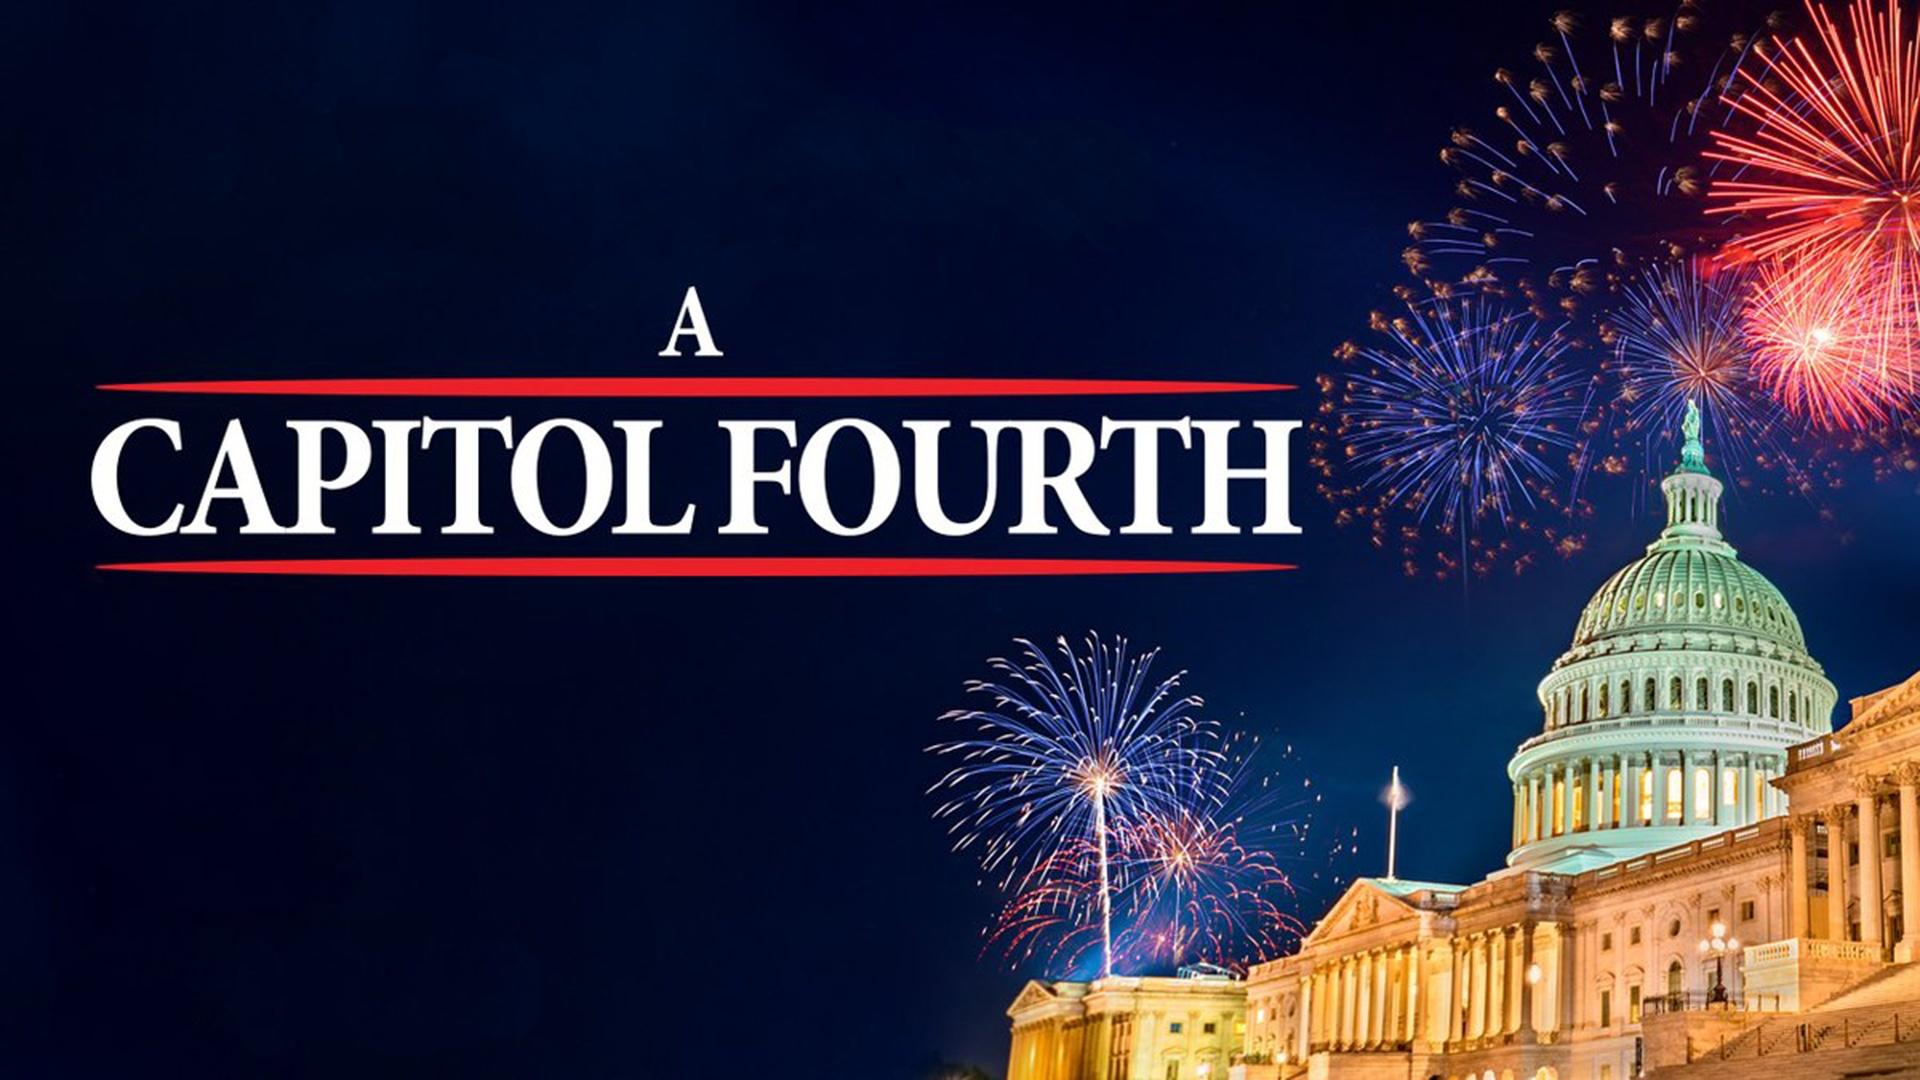 Celebrate a Beloved American Tradition with 'A Capitol Fourth'